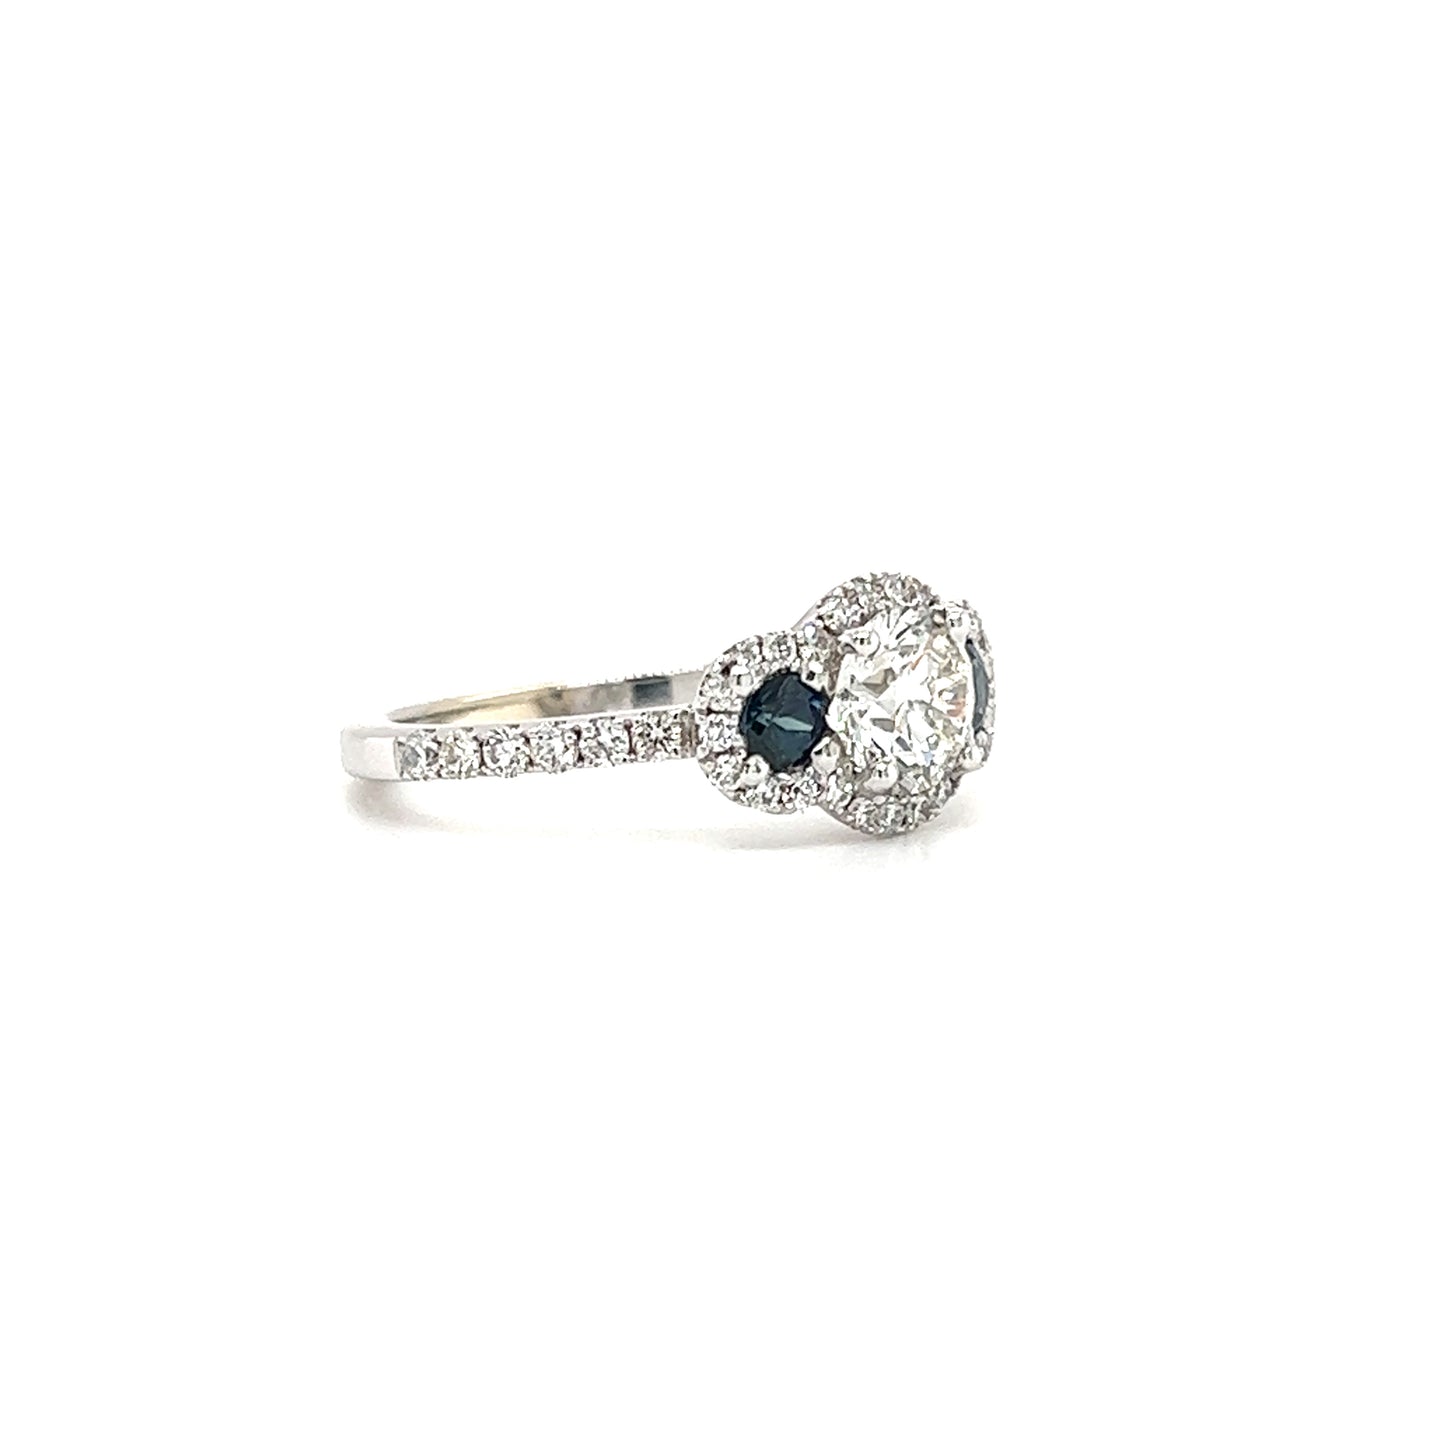 Round Diamond Ring with Two Side Sapphires and Diamond Halo in 14K White Gold Right Side View